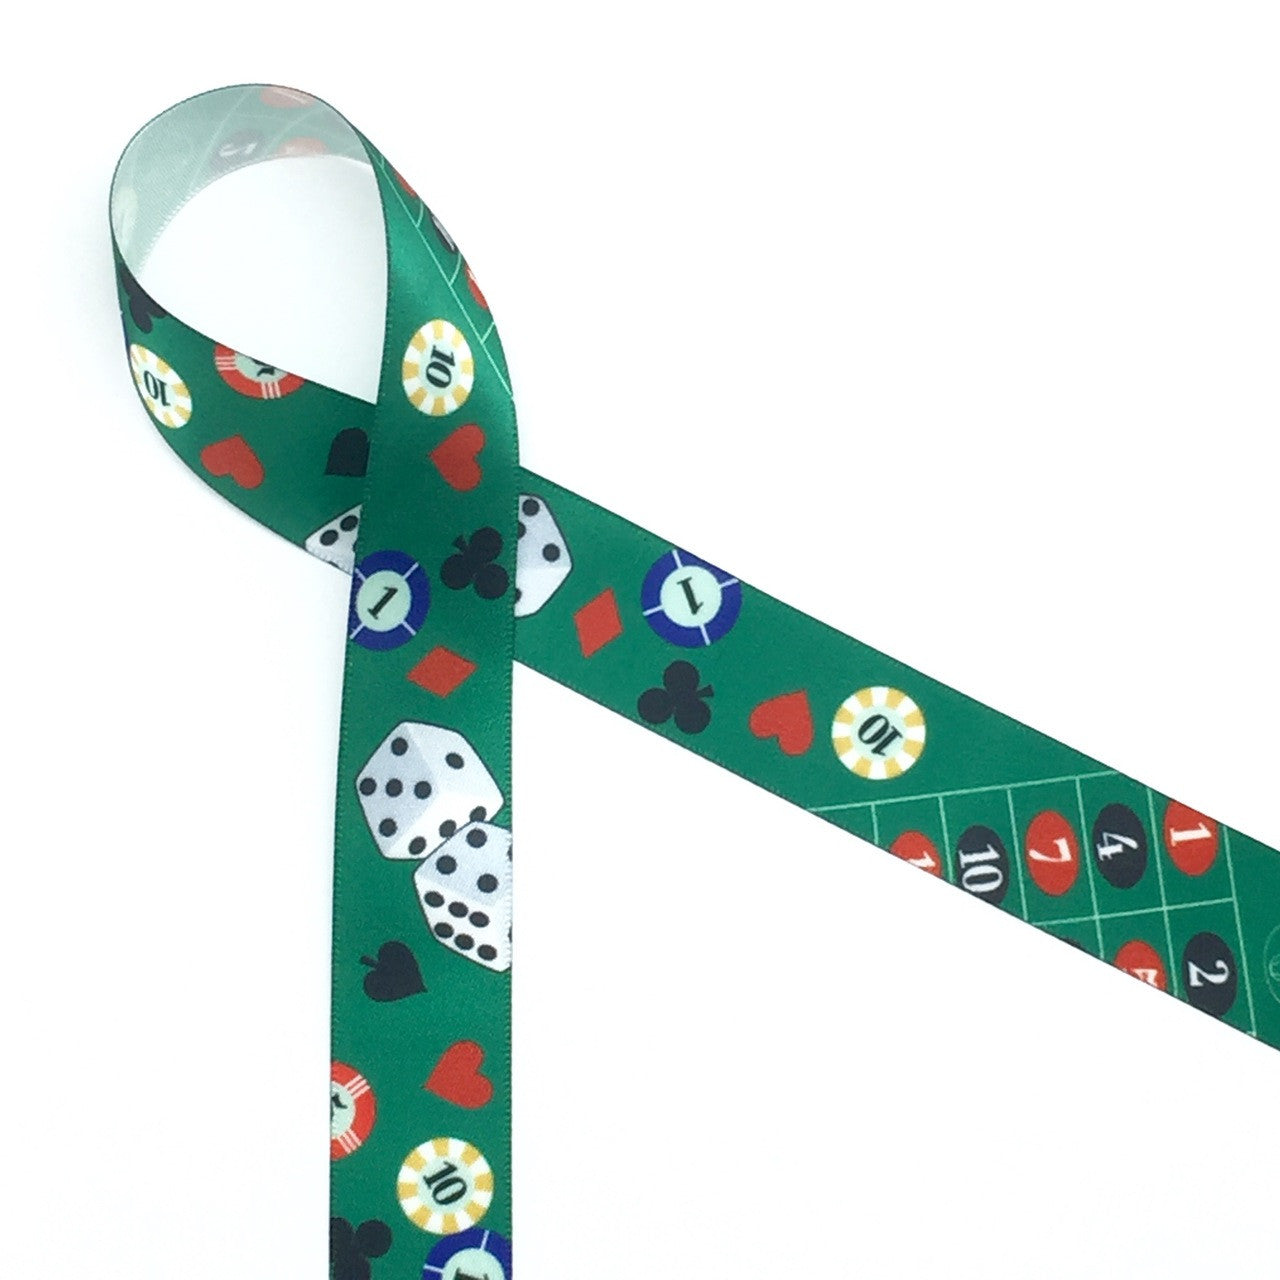 Casino themed ribbon with dice, chips, hearts, diamonds, clubs and spades.